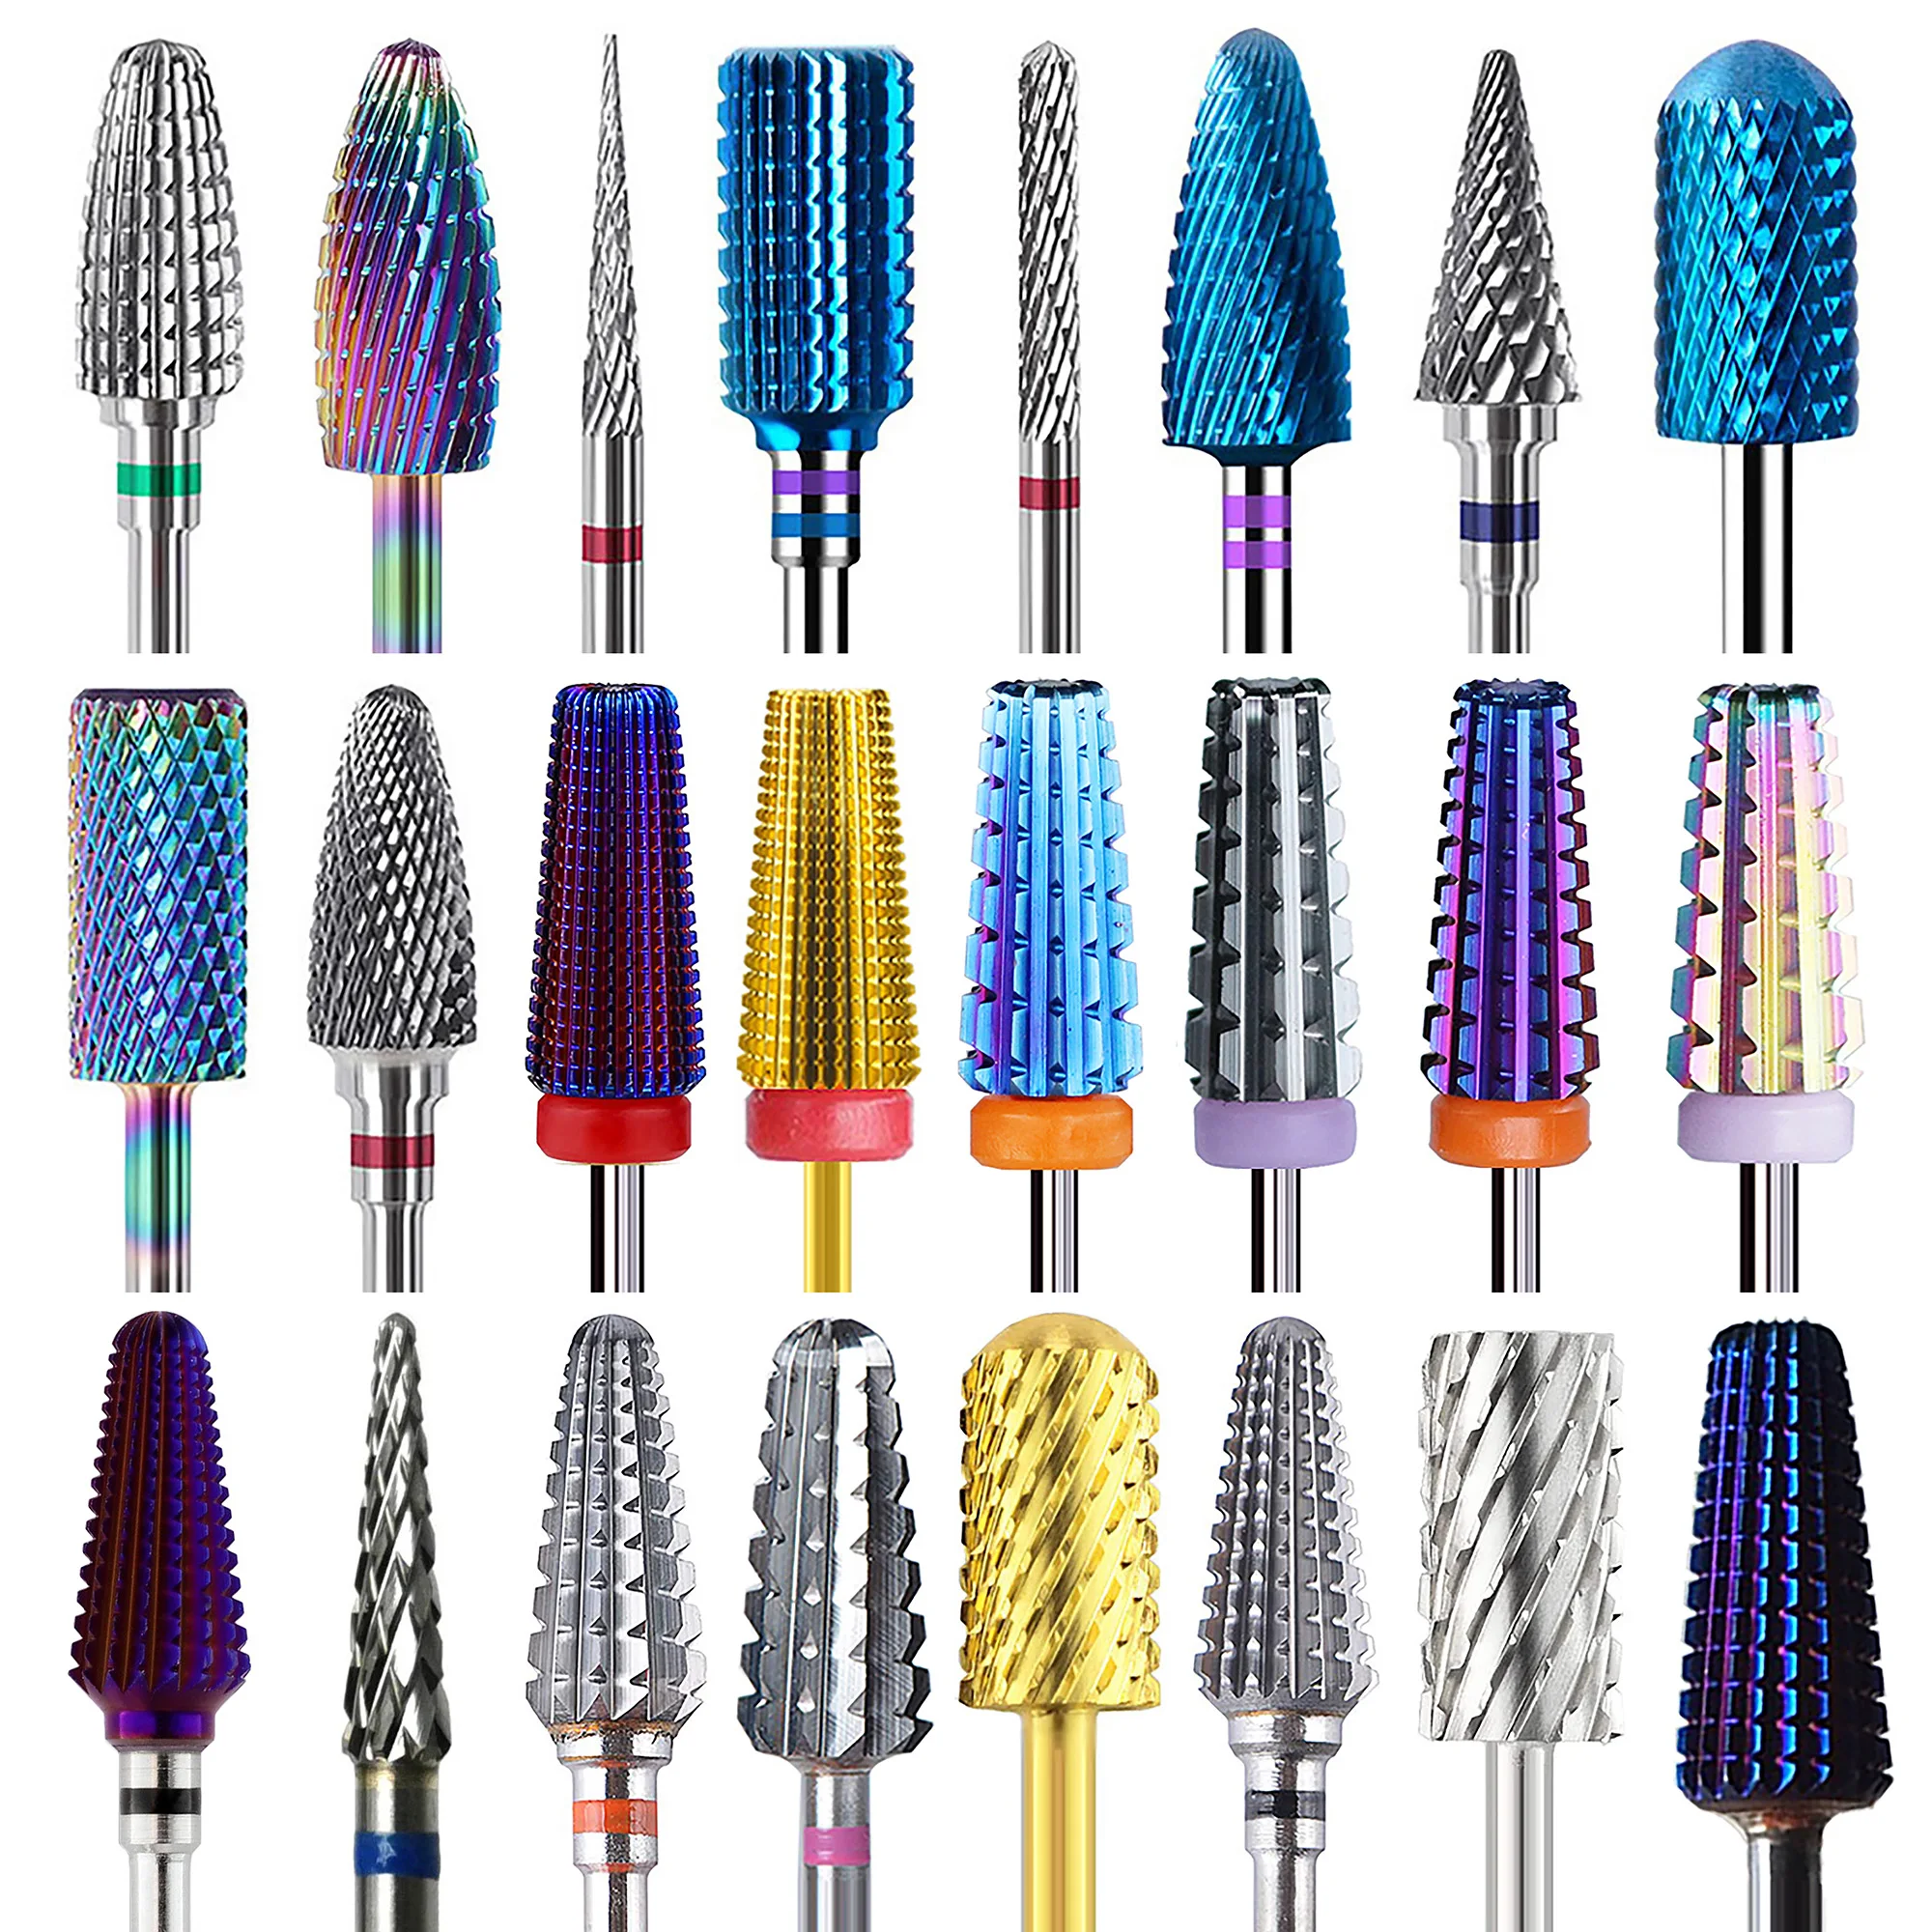 

Wholesale Tungsten Carbide Ceramic Nail Drill Bits Tornado Nail Milling Cutter Nail Carbide 5 in 1 Bit - Two Way Rotate Use